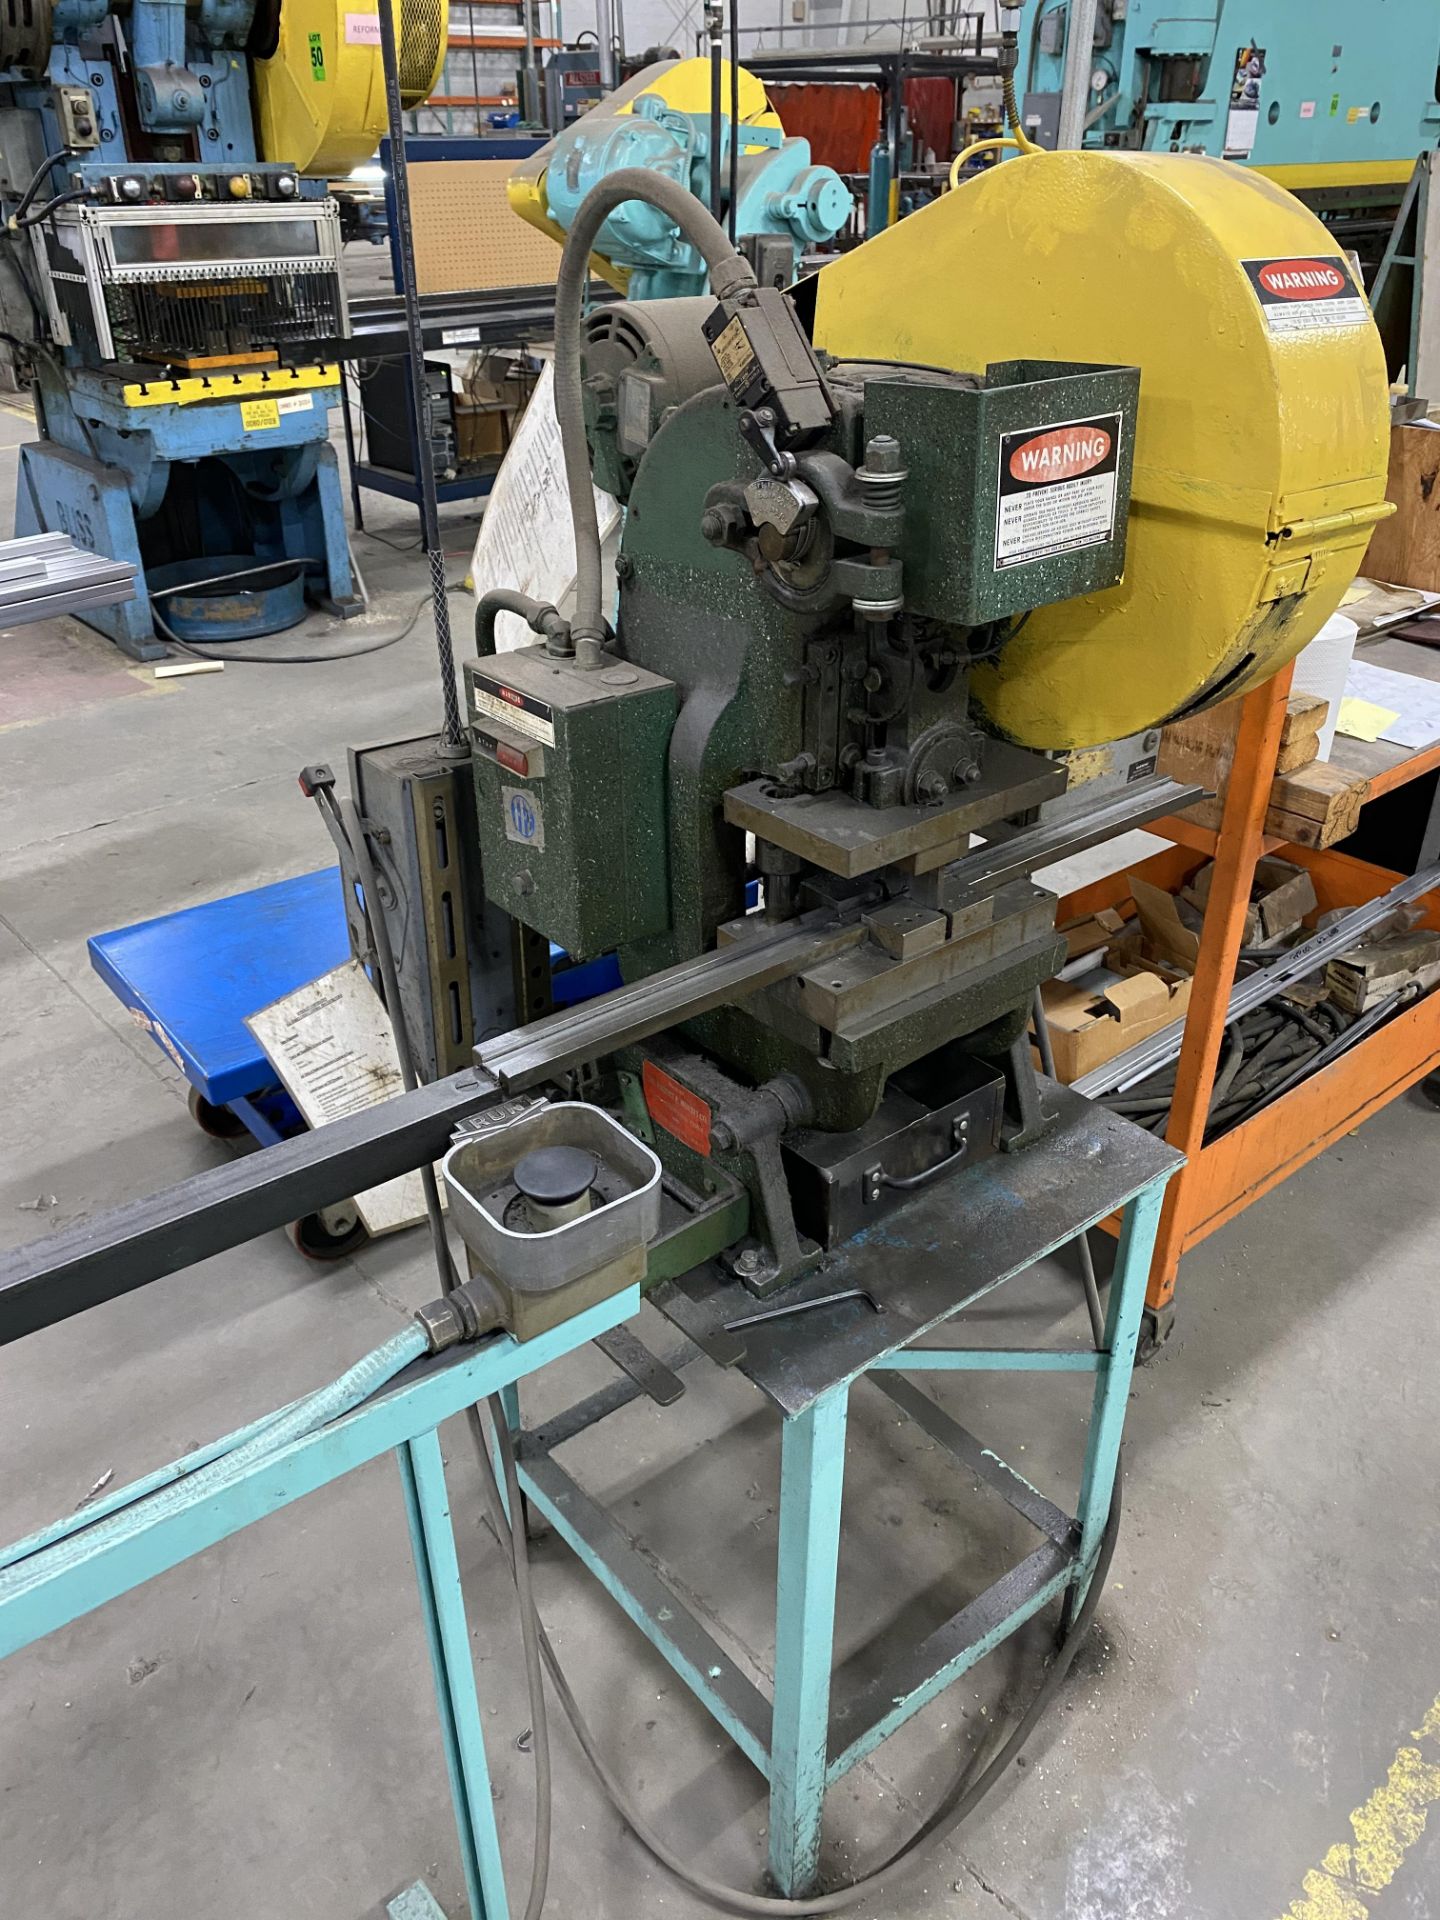 ROUSSELLE 5-Ton Mechanical OBI Punch Press mod.0A 5-Ton Post, s/n: 23770 - Image 2 of 5